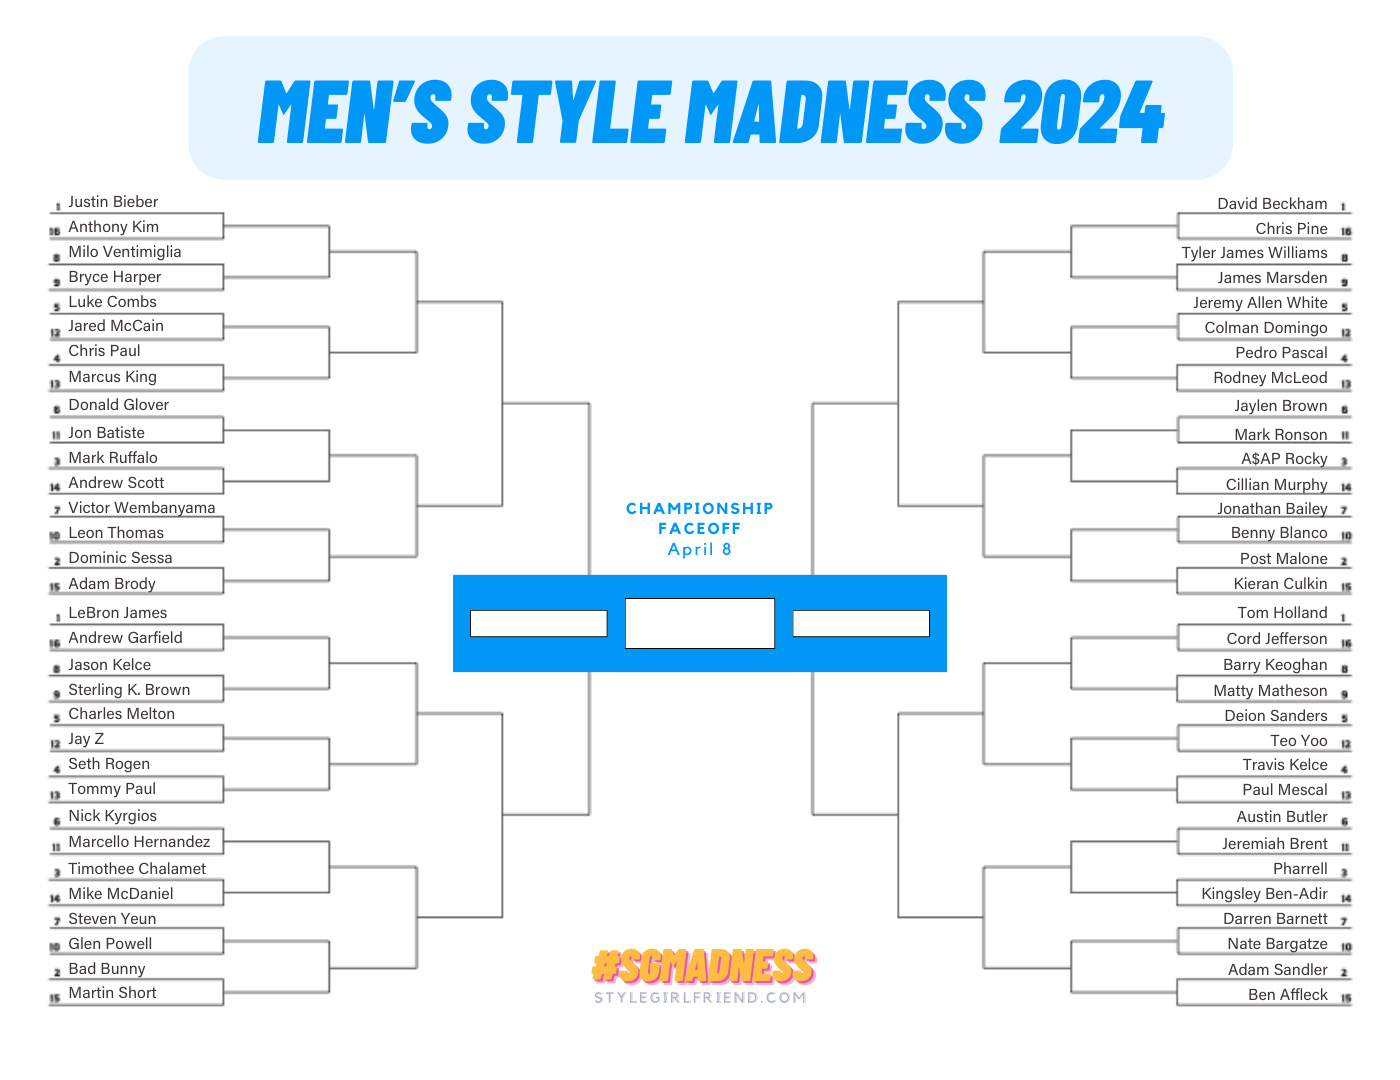 SG Men's Style Madness 2024 bracket asking users to vote for who they think is the most stylish man of 2024